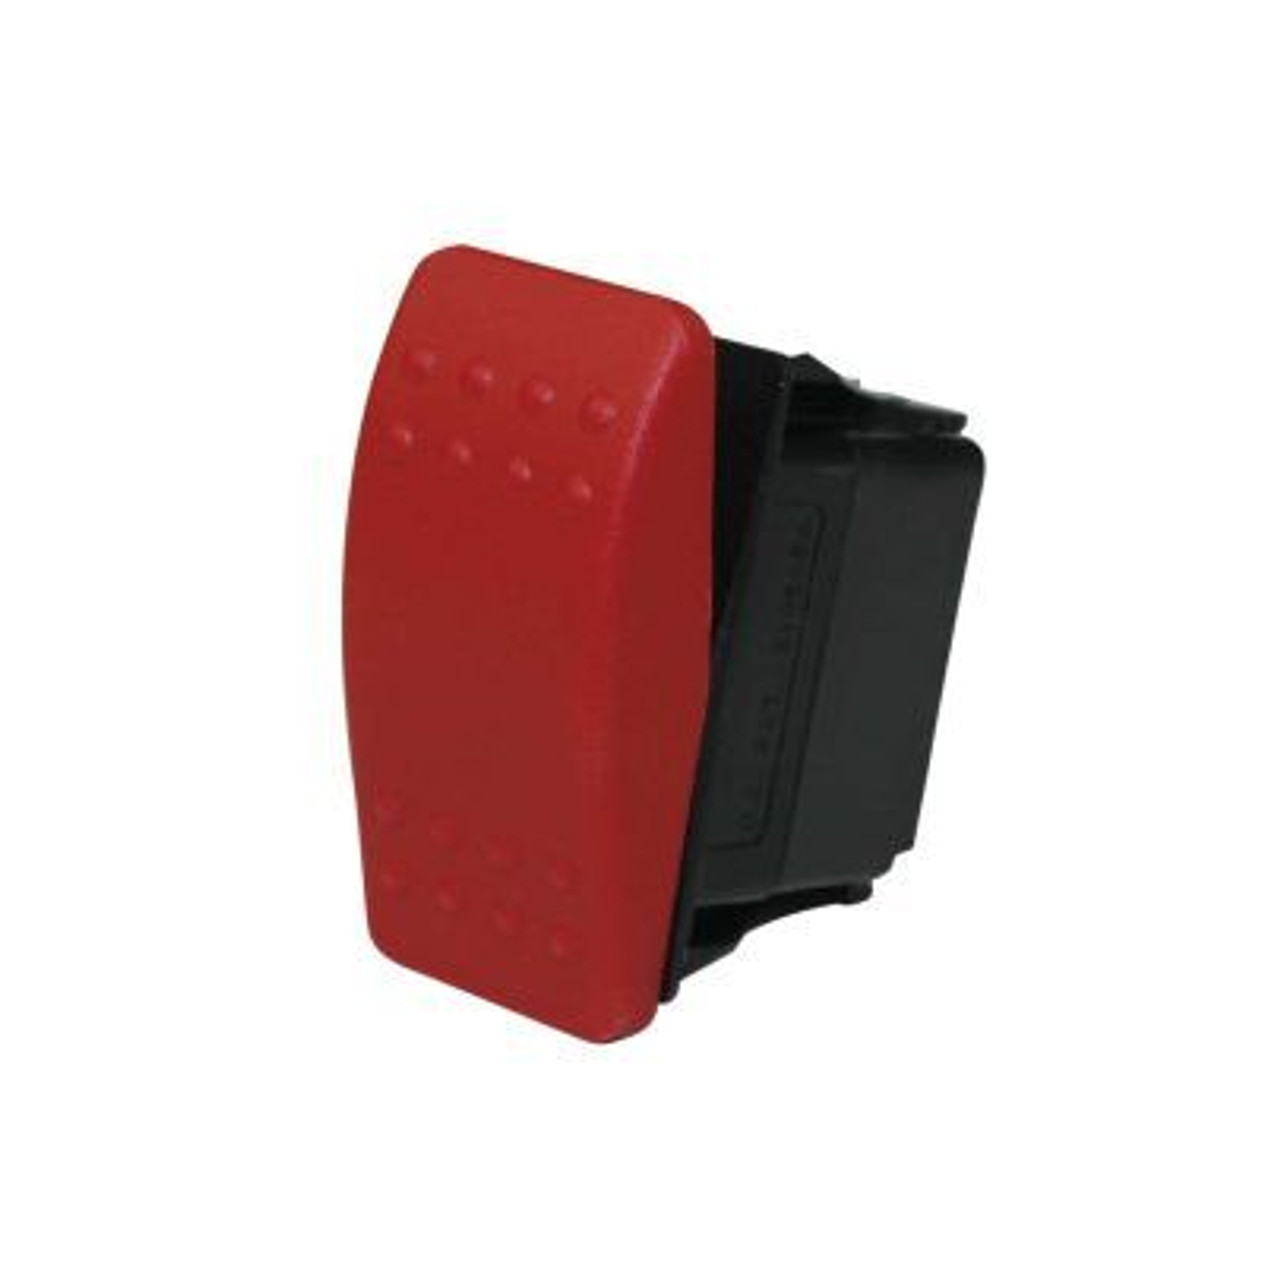 Moroso Repl. Red Cover - Rocker Momentary Switch